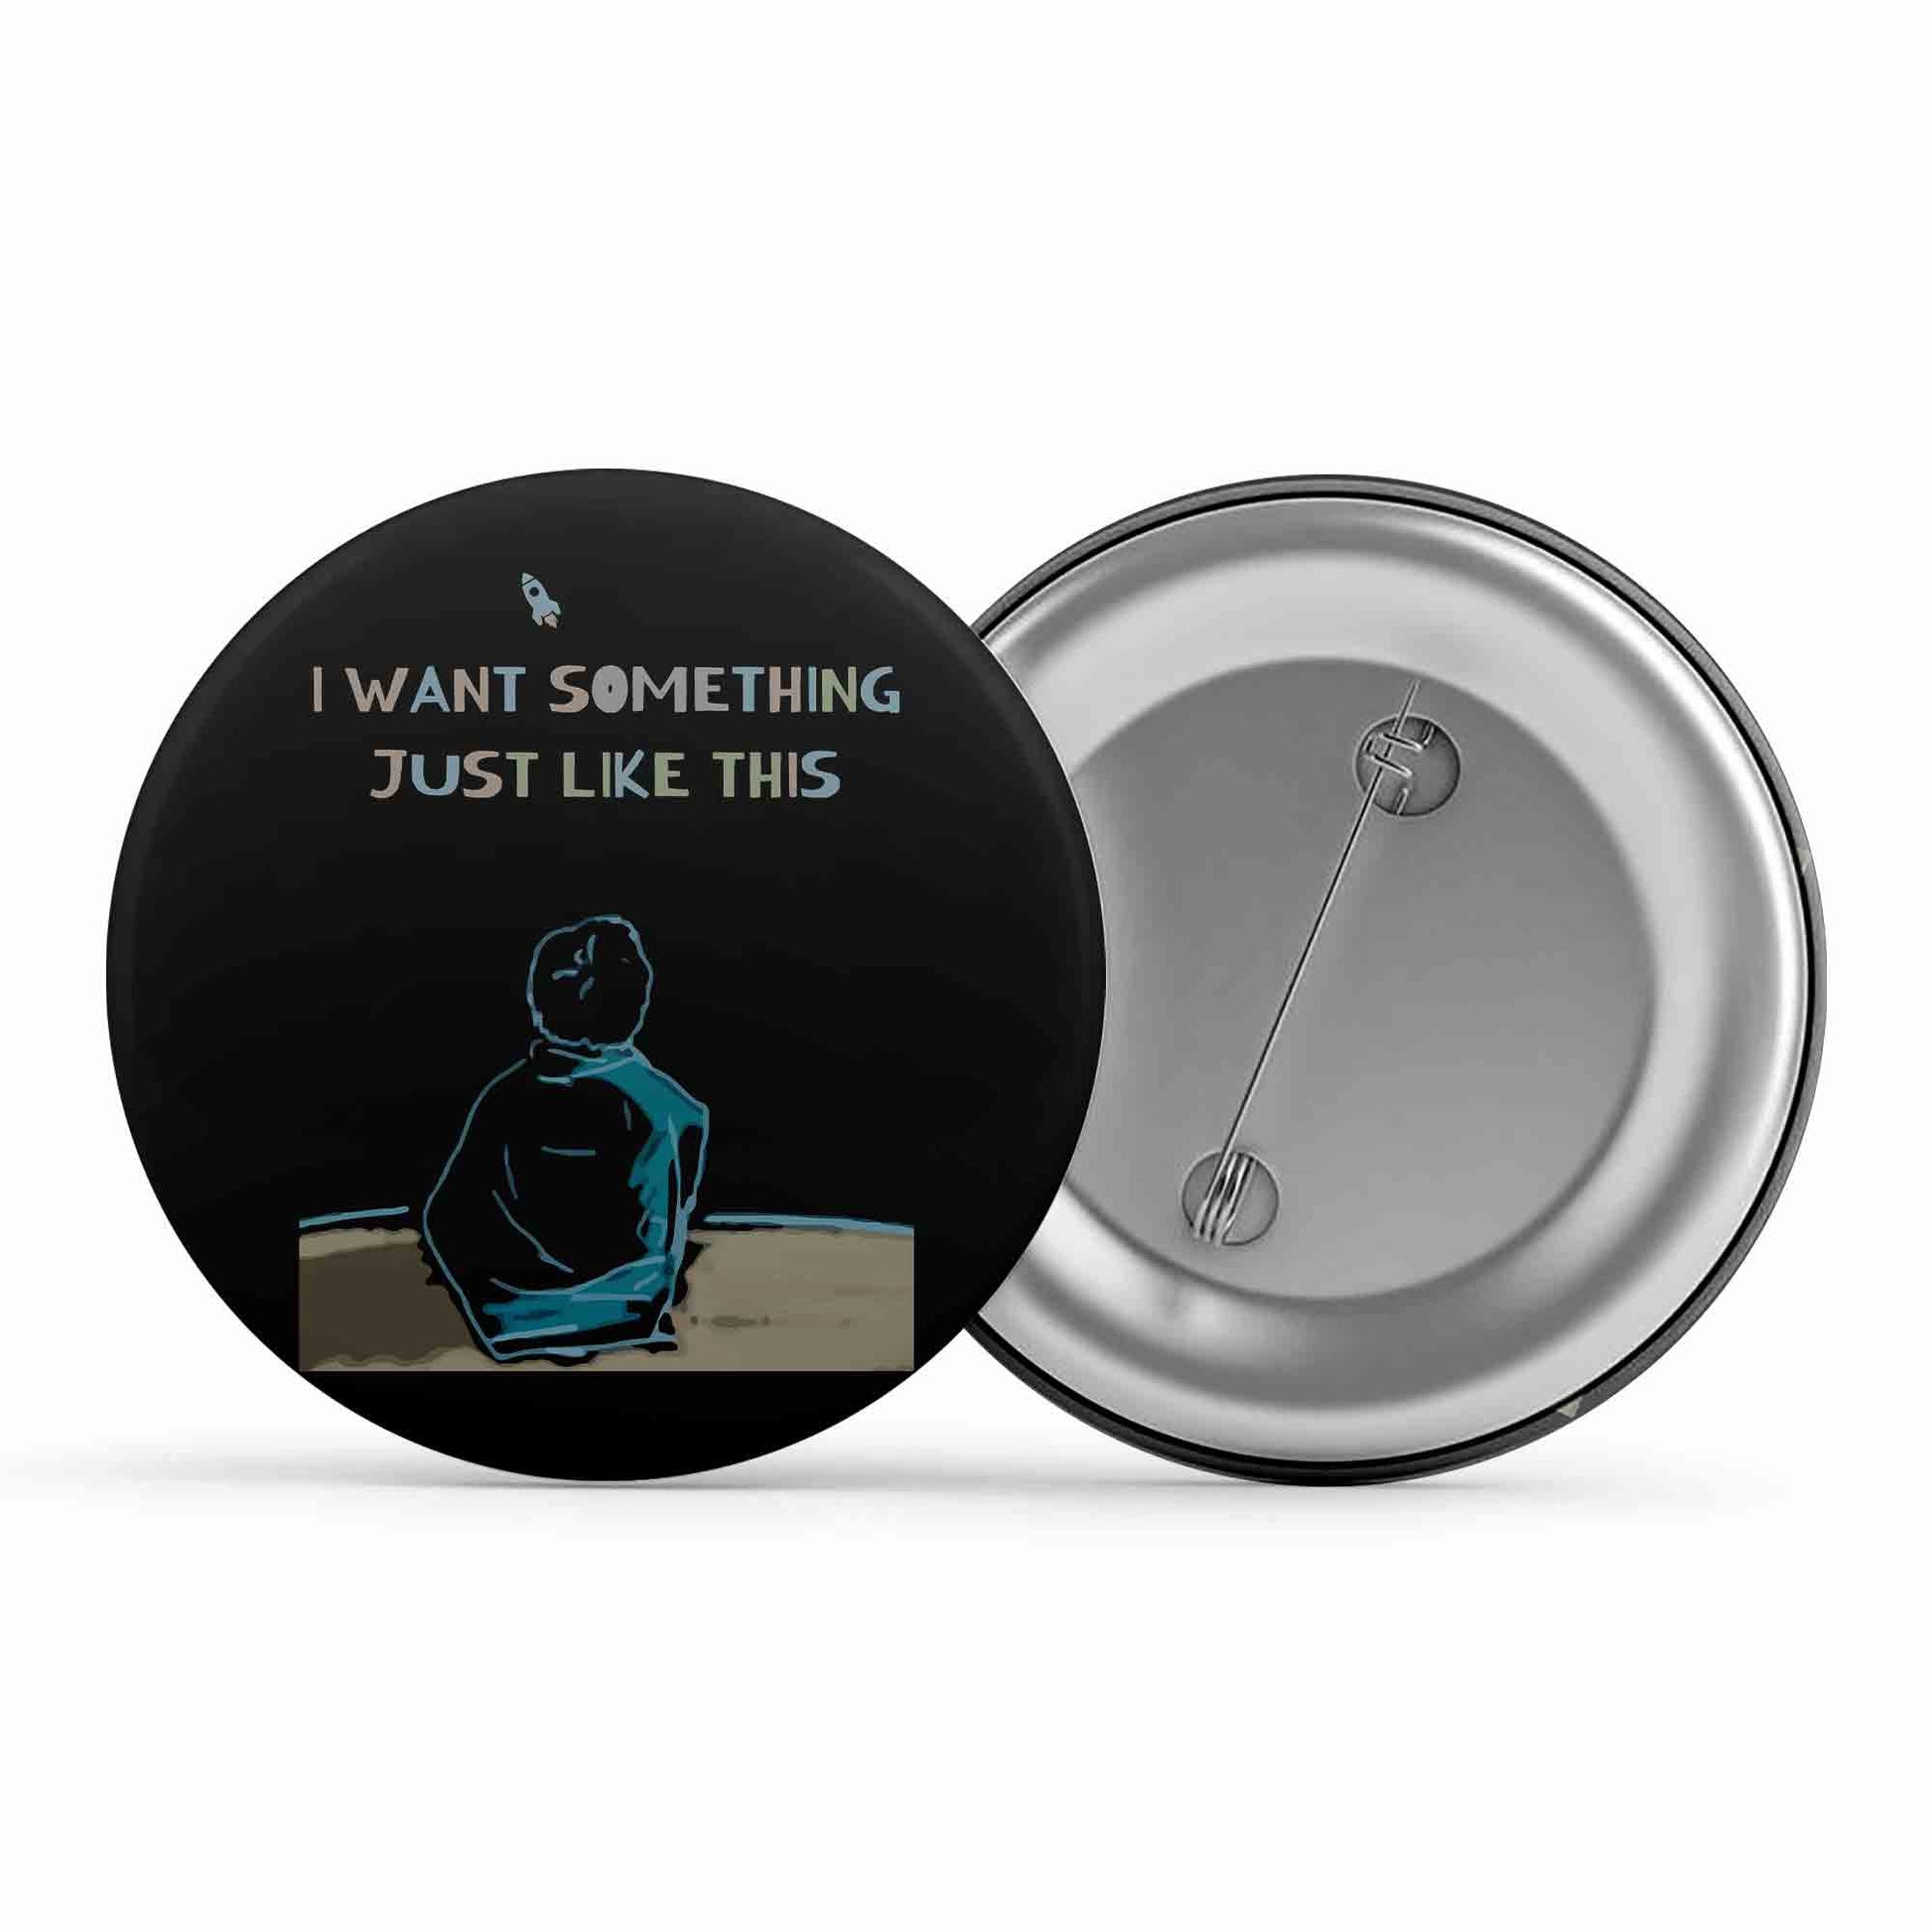 coldplay i want something just like this badge pin button music band buy online india the banyan tee tbt men women girls boys unisex